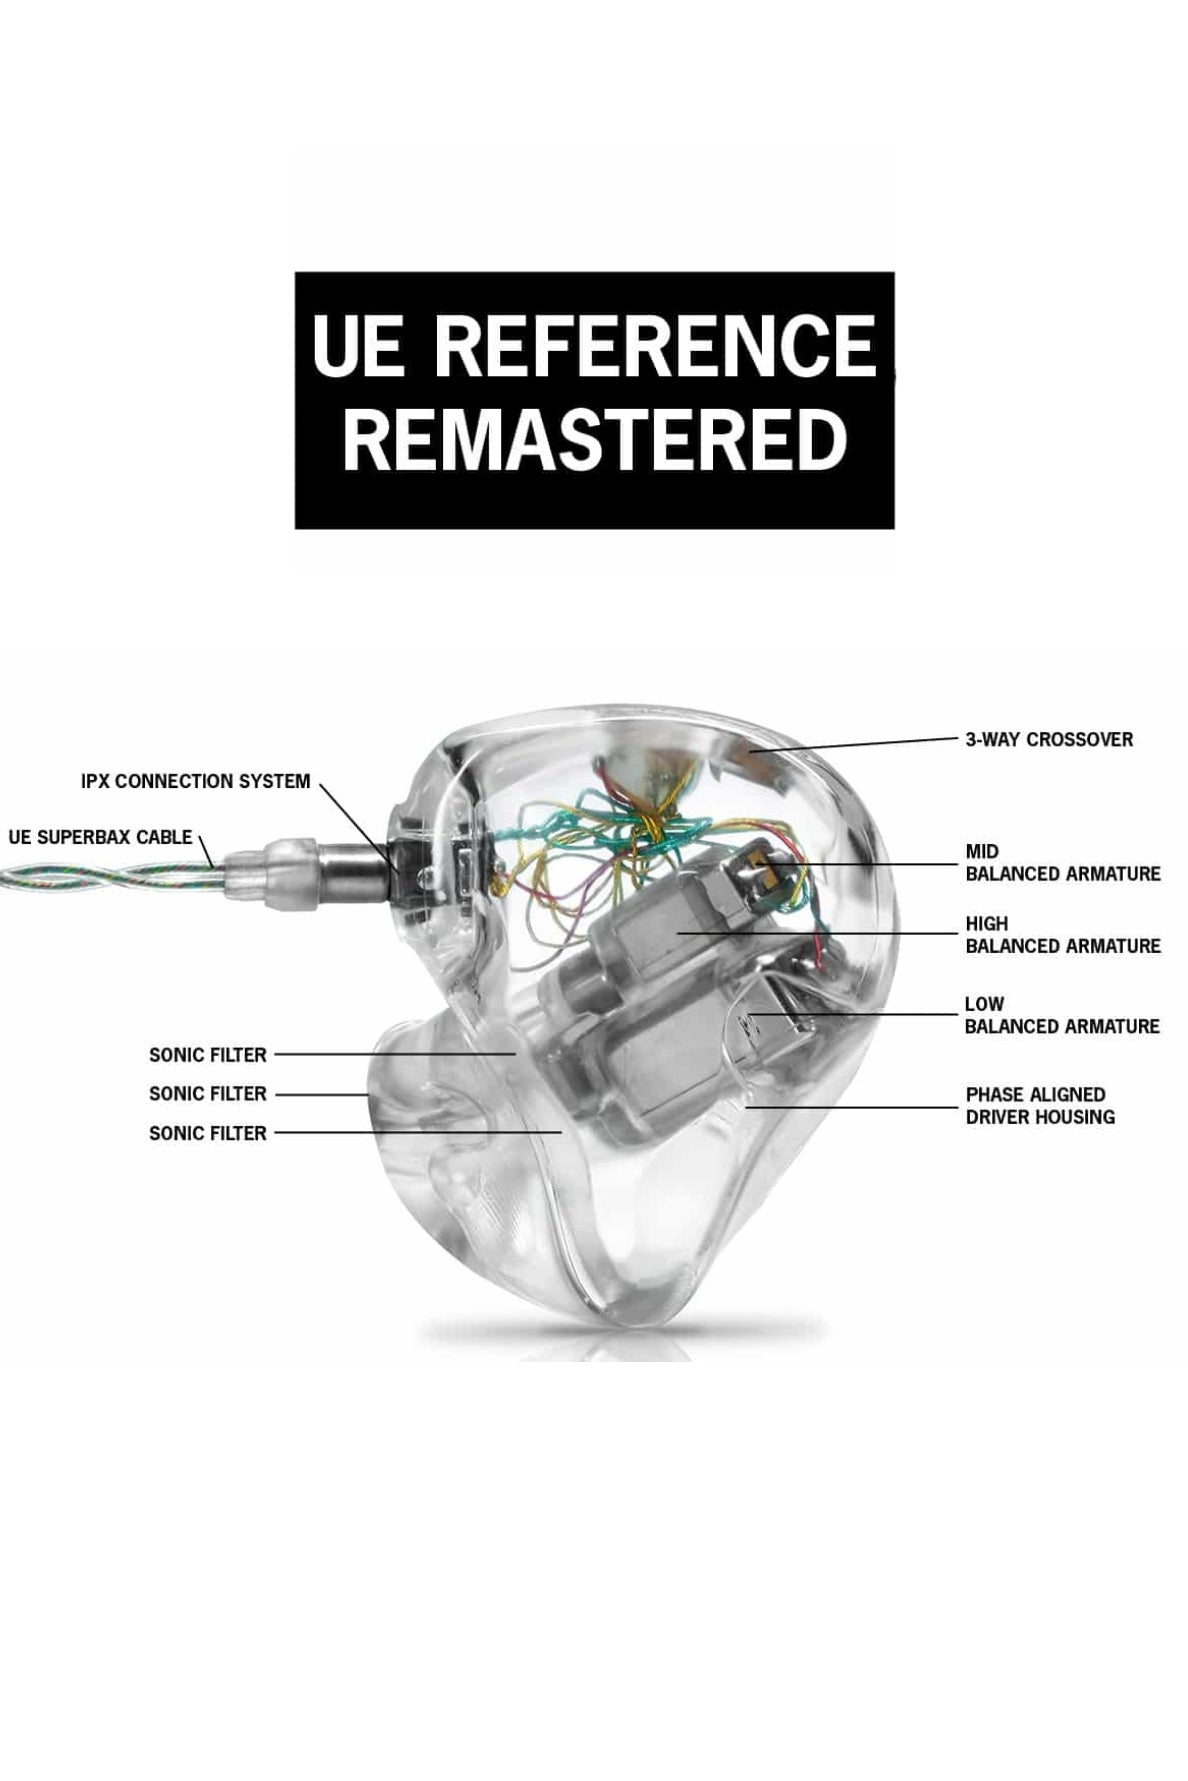 UE REFERENCE REMASTERED